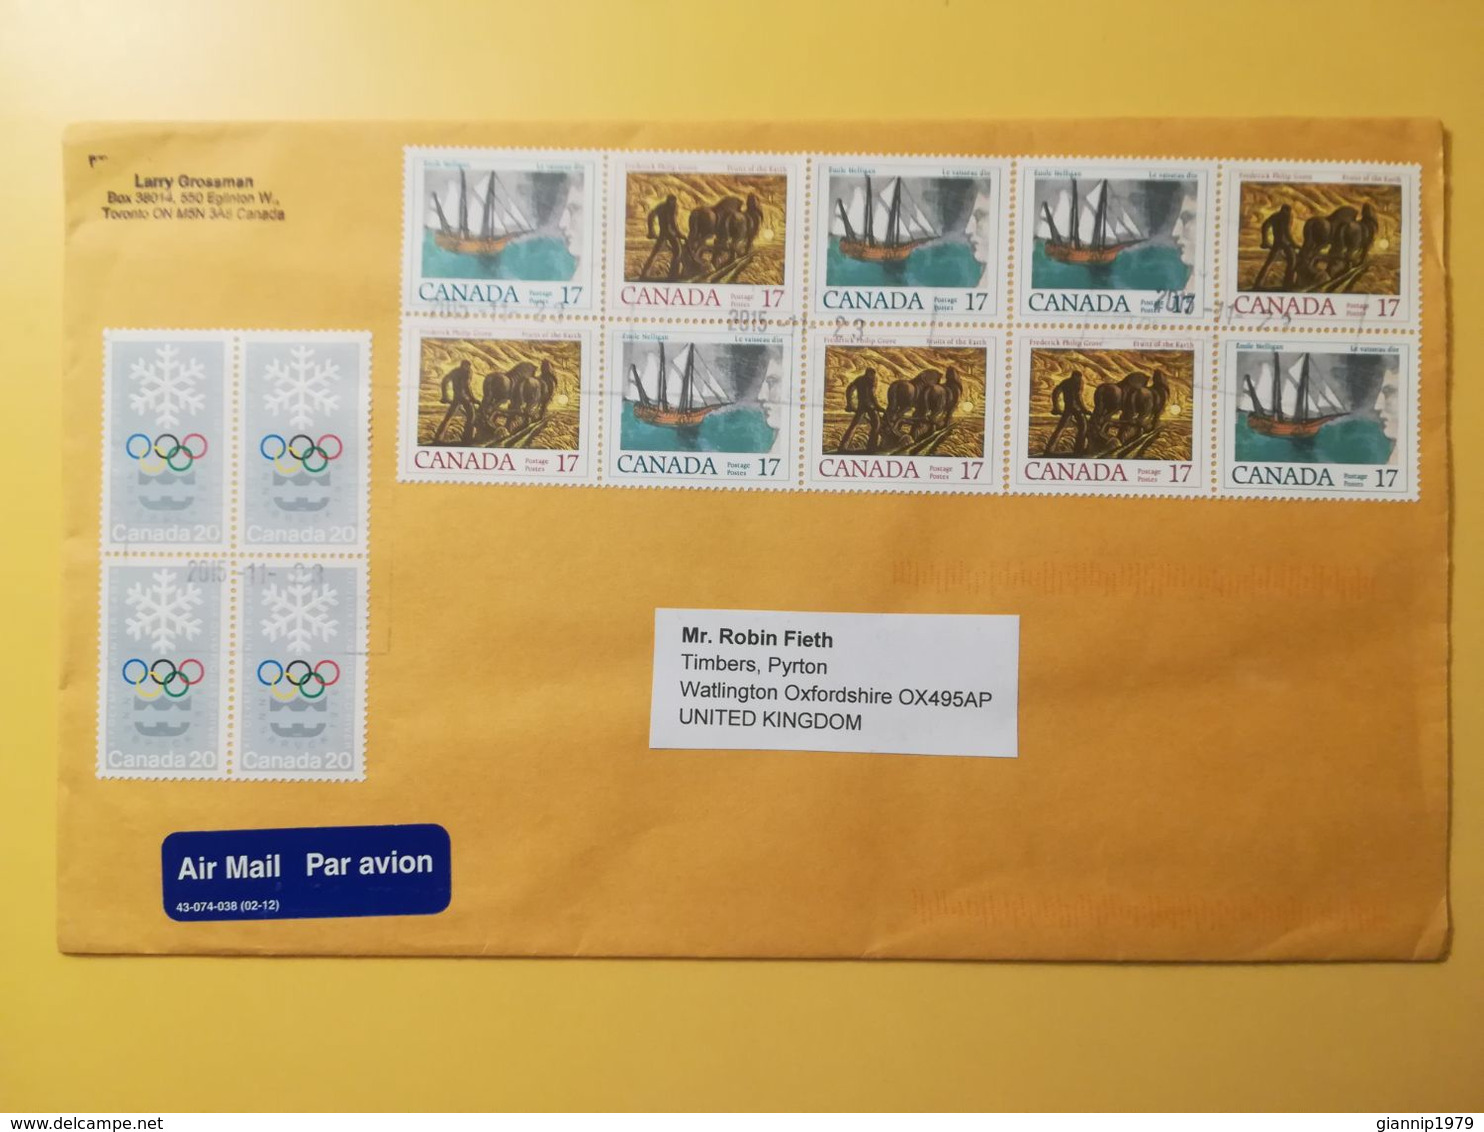 2015 BUSTA  AIR MAIL CANADA  BOLLO CANADIAN WRITERS GIOCHI PLIMPICI INVERNALI OLYMPIC GAMES ANNULLO OBLITERE' - Lettres & Documents